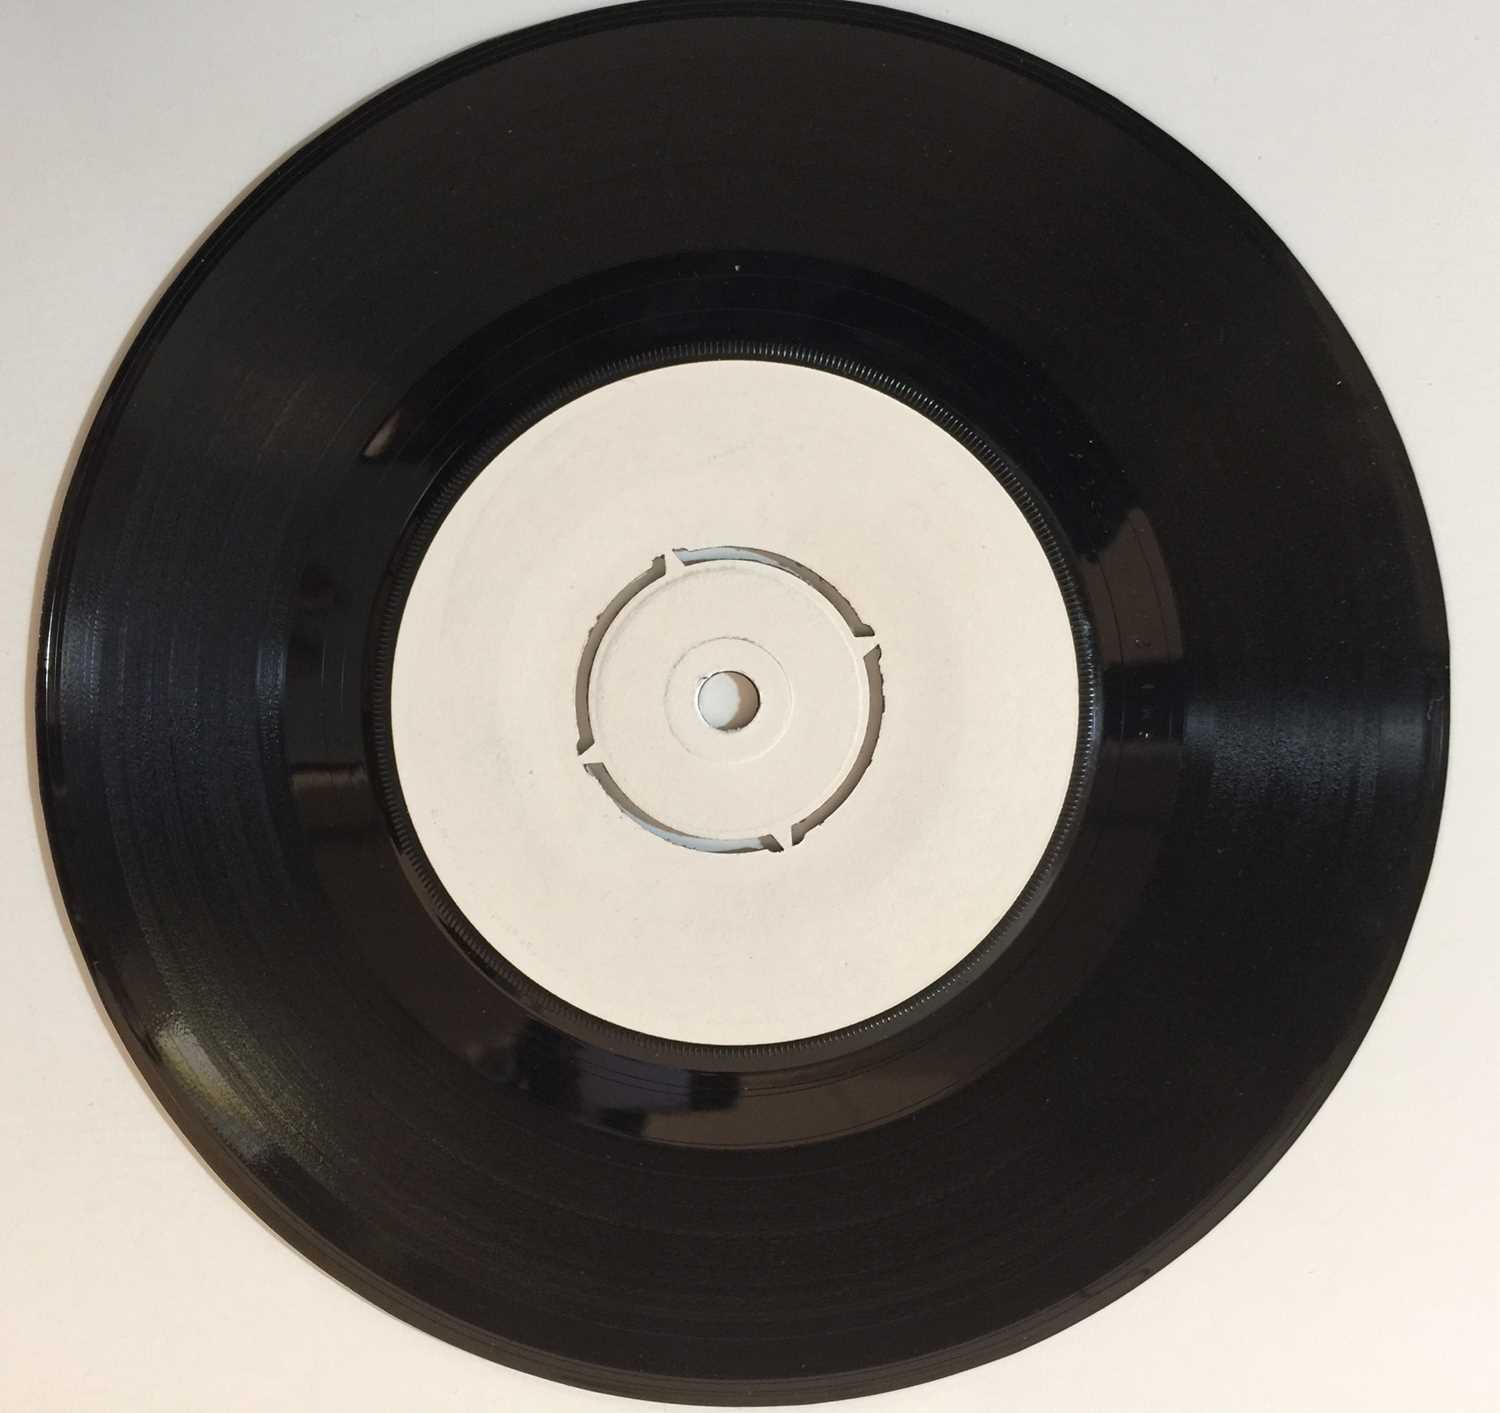 Queen - Somebody To Love 7" (UK White Label Test Pressing - EMI 2565 - Image 3 of 4